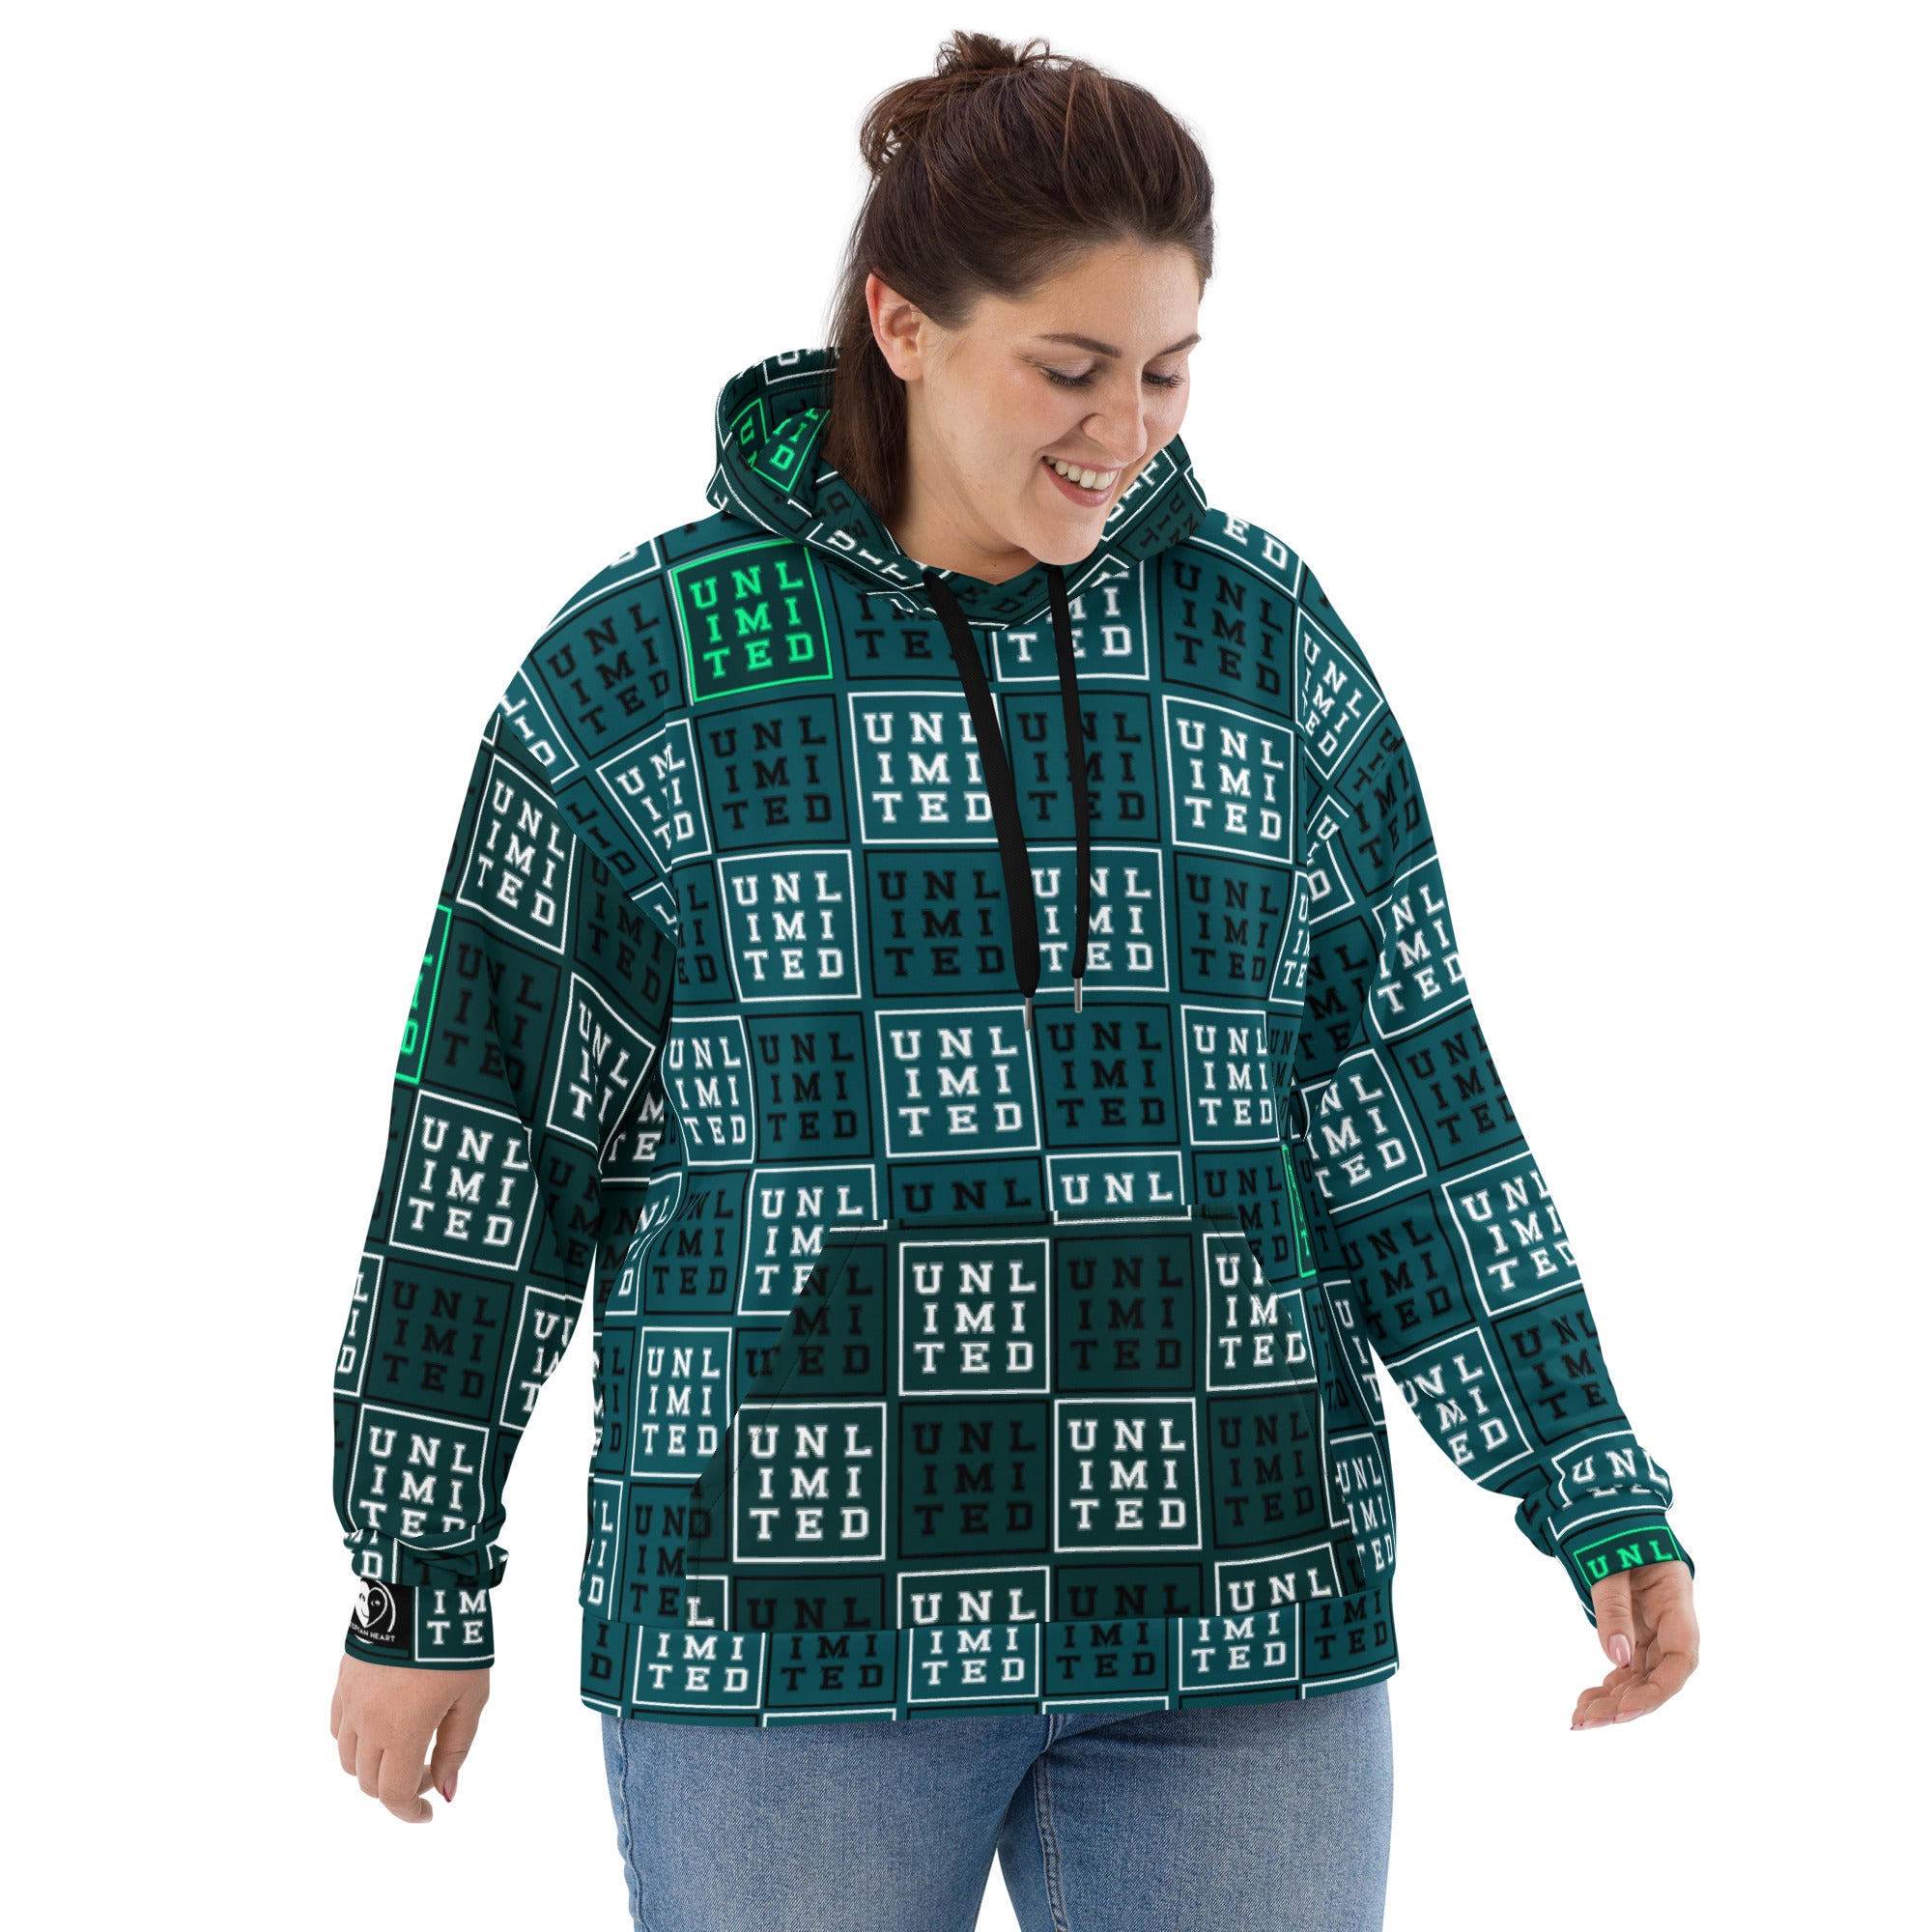 Unlimited Green - All-Over Print Unisex Hoodie